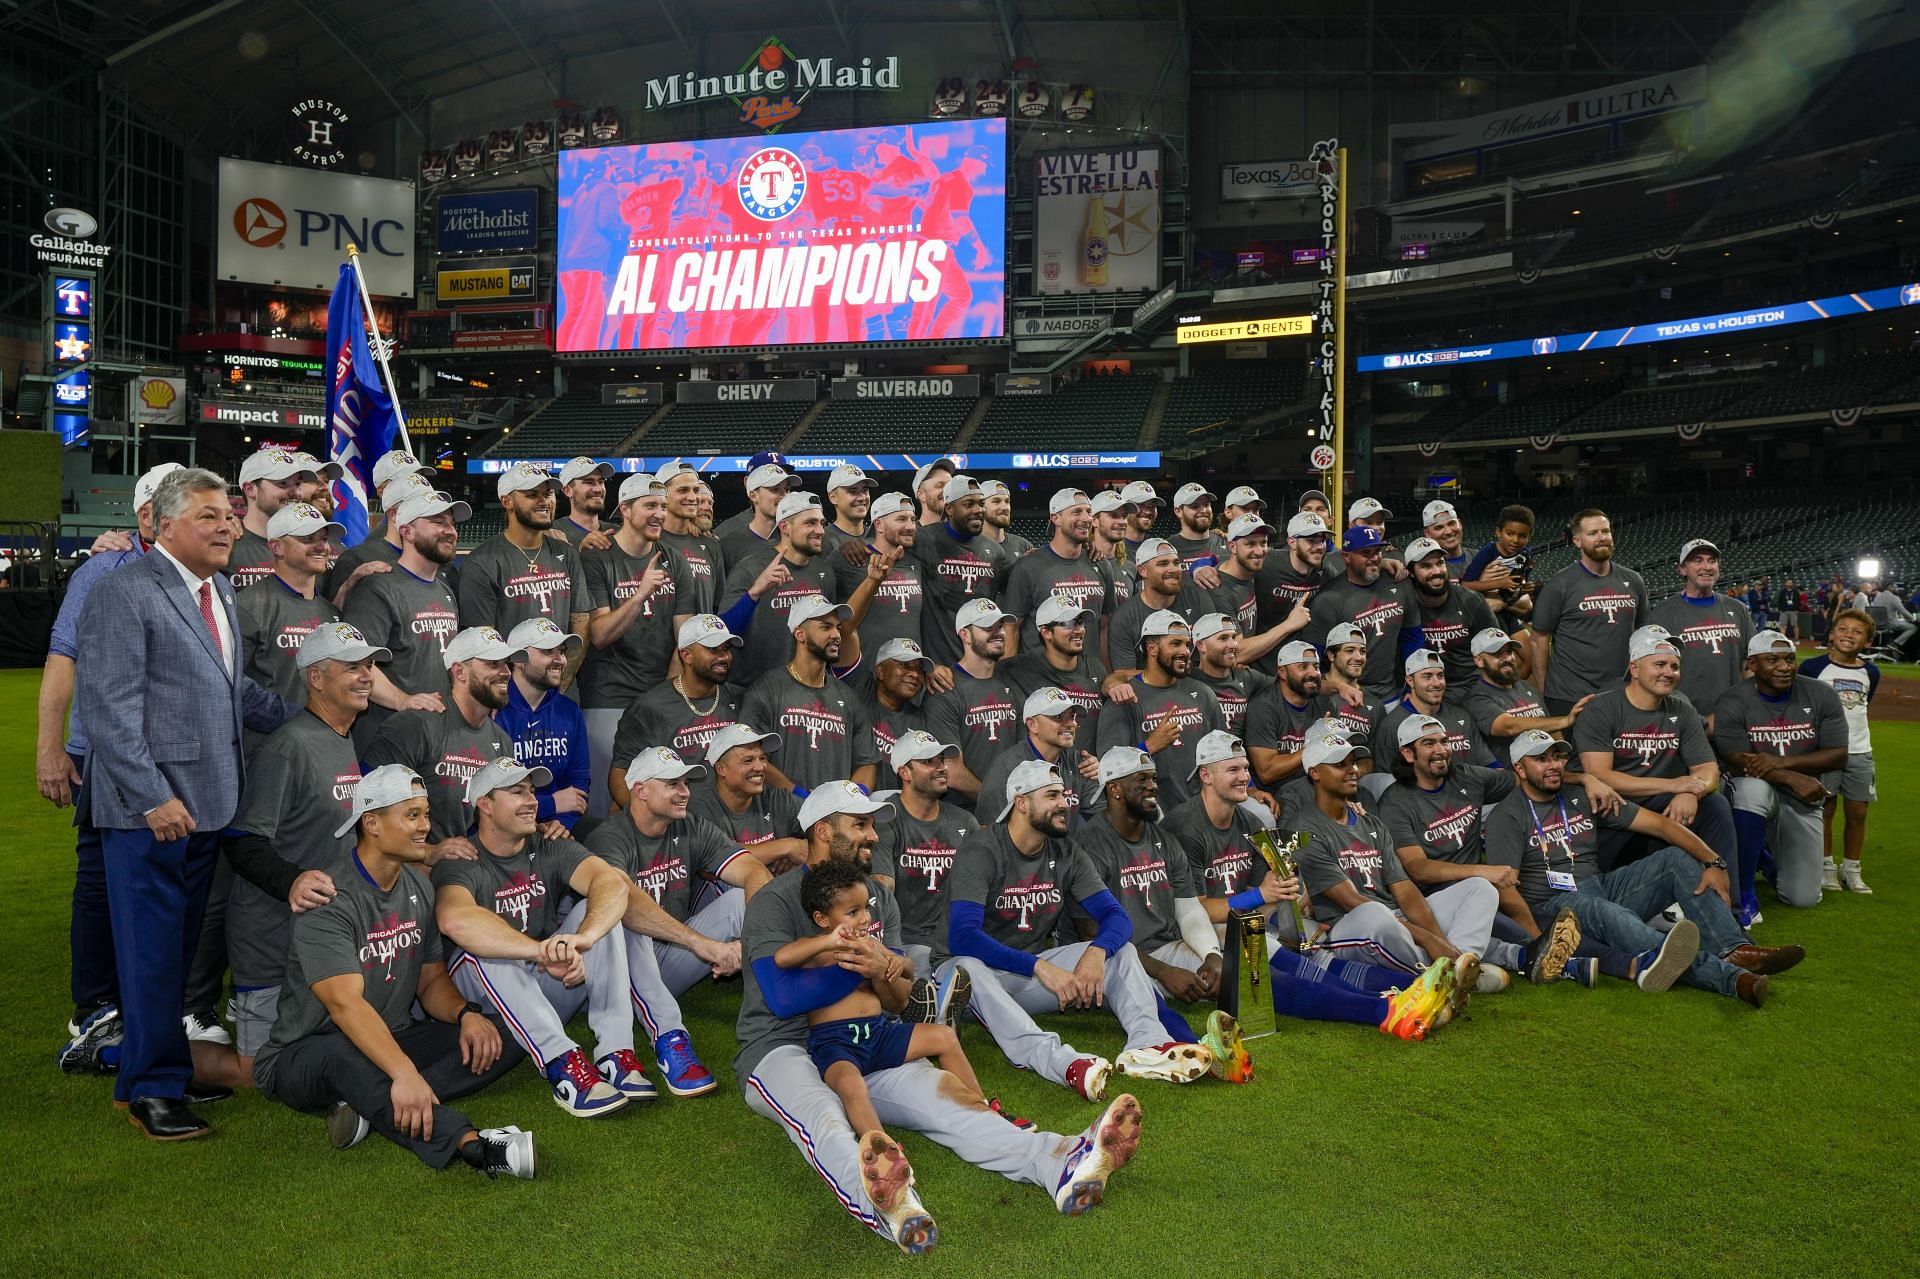 The Texas Rangers clinched their spot in the World Series with an 11-4 victory over the Houston Astros in Game 7 of the ALCS.